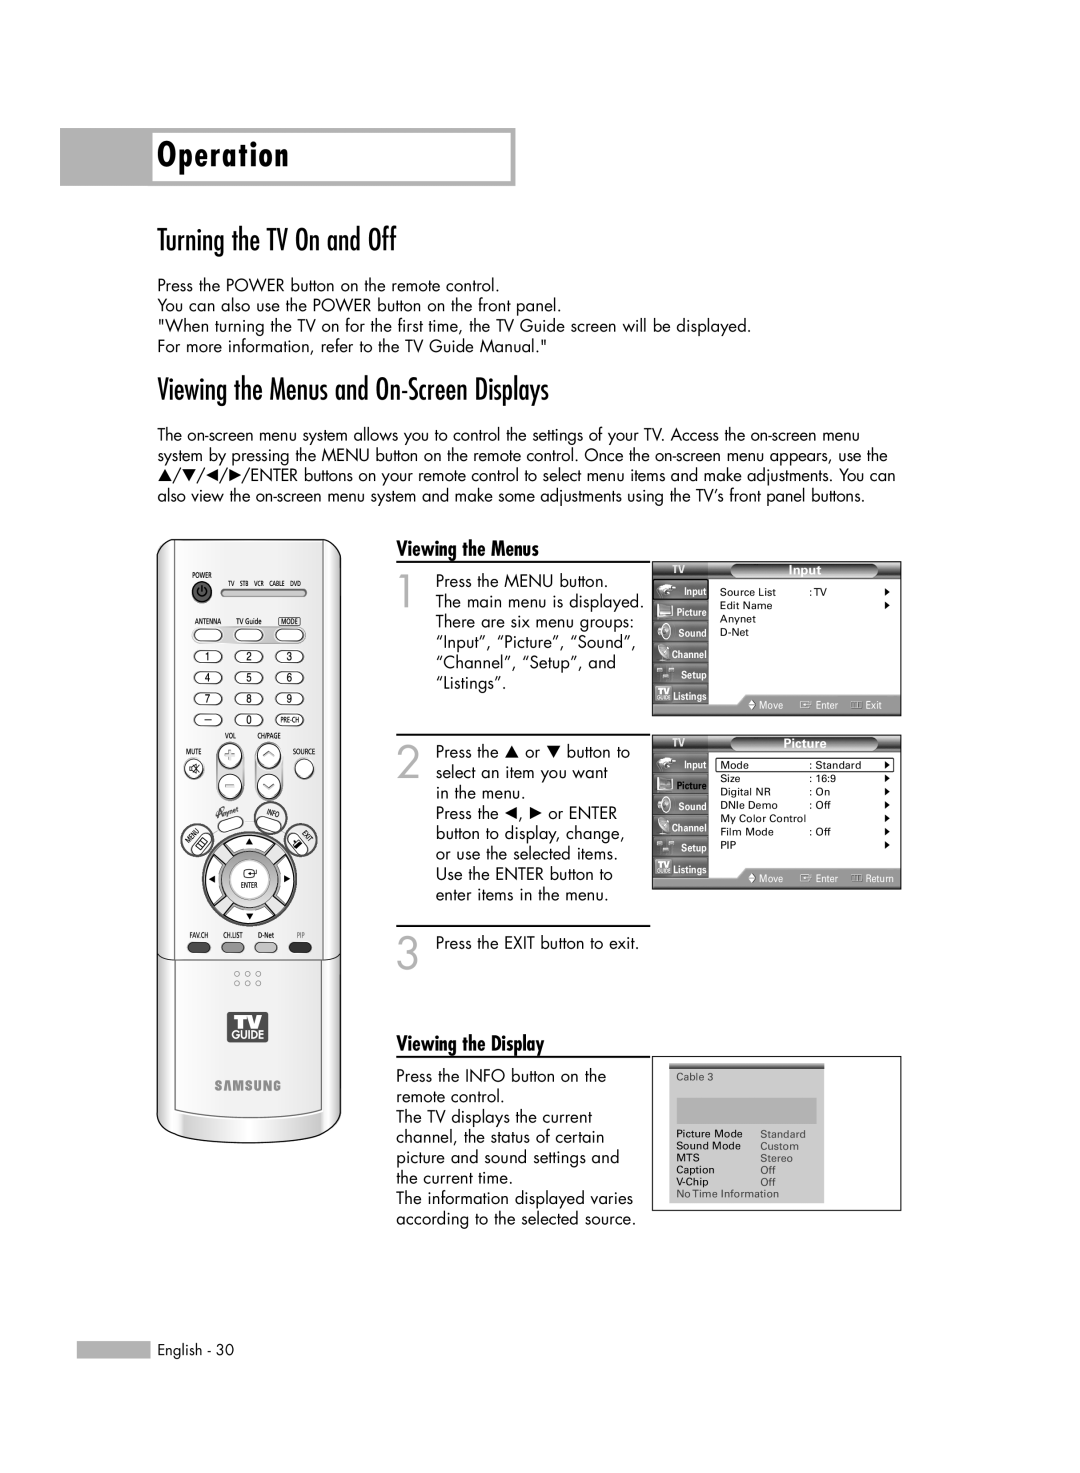 Samsung HL-R5688W Operation, Turning the TV On and Off, Viewing the Menus and On-Screen Displays, Viewing the Display 